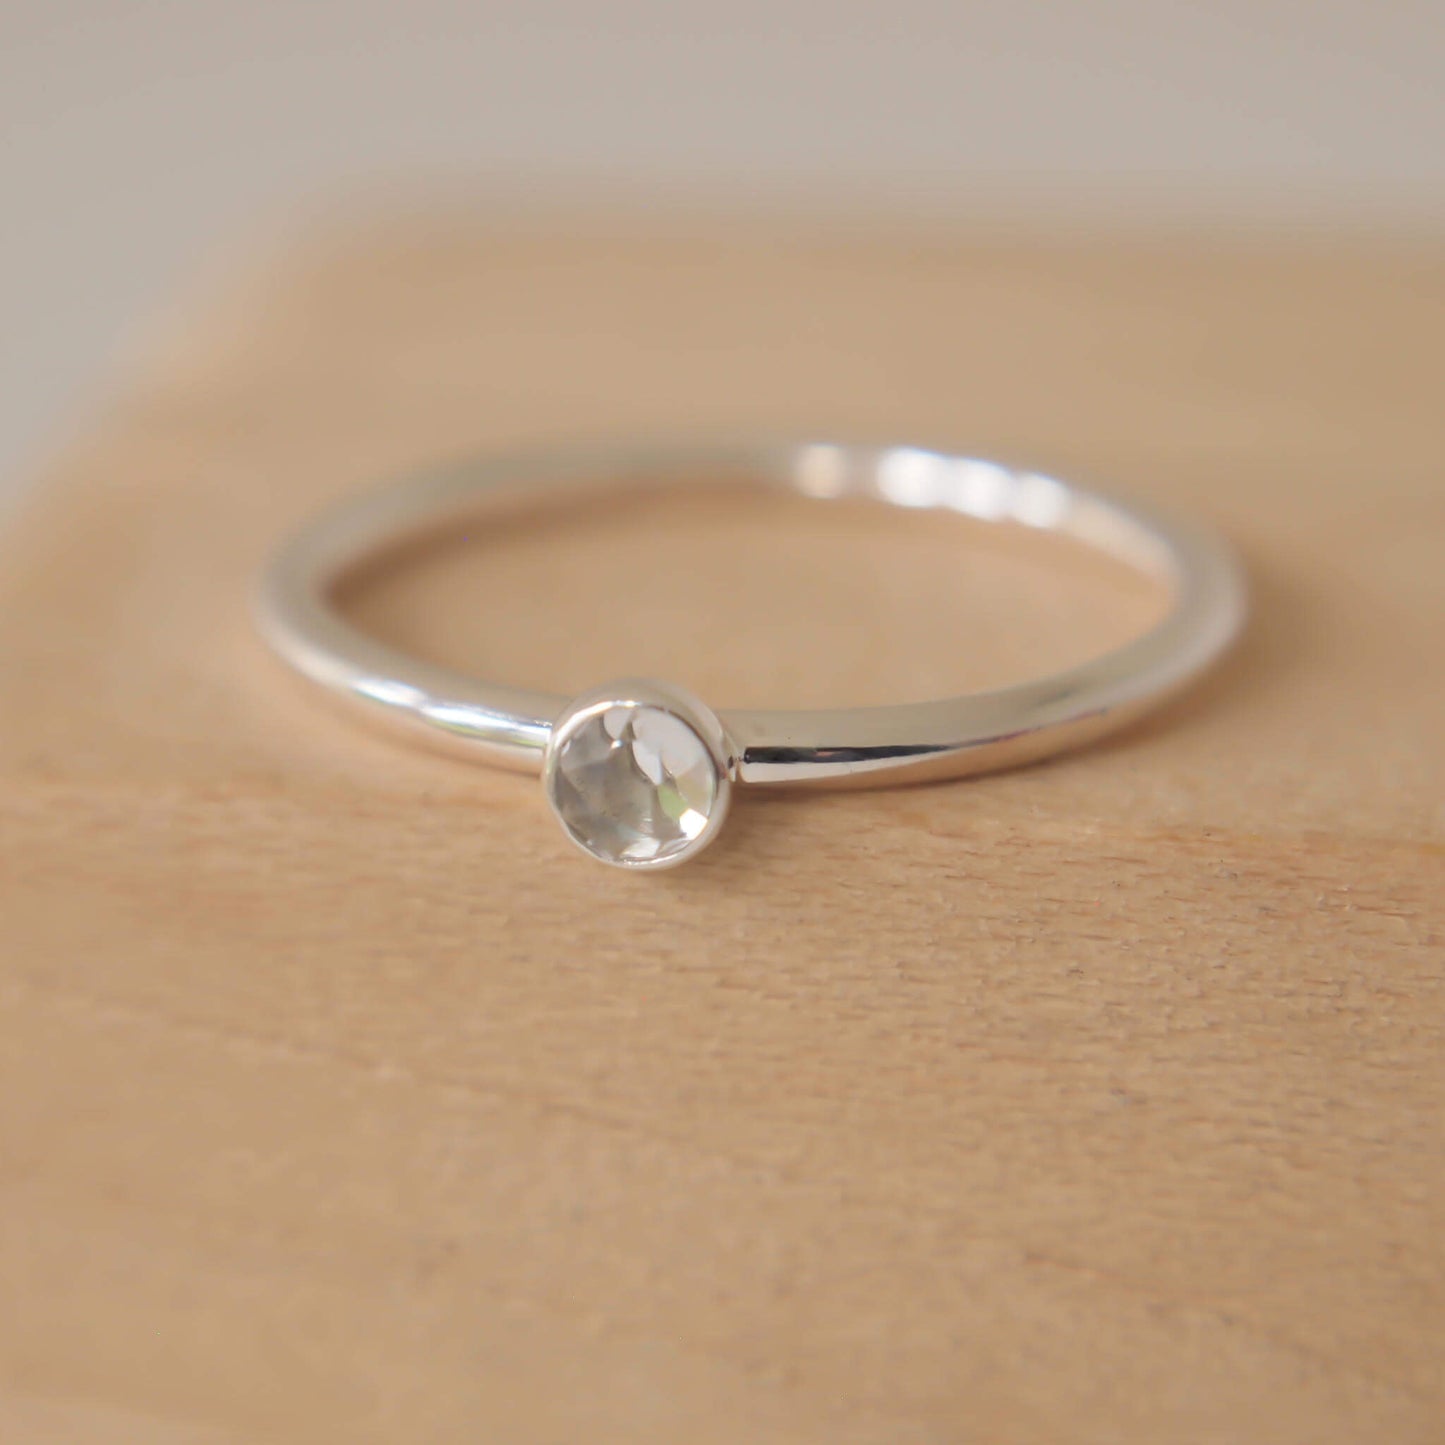 White Topaz and Sterling Silver Birthstone RIng for April. The ring is simple in style on a plain fully round band with a small round facet cut pale white topaz in the centre. The ring is handmade to your size by maram jewellery in Scotland